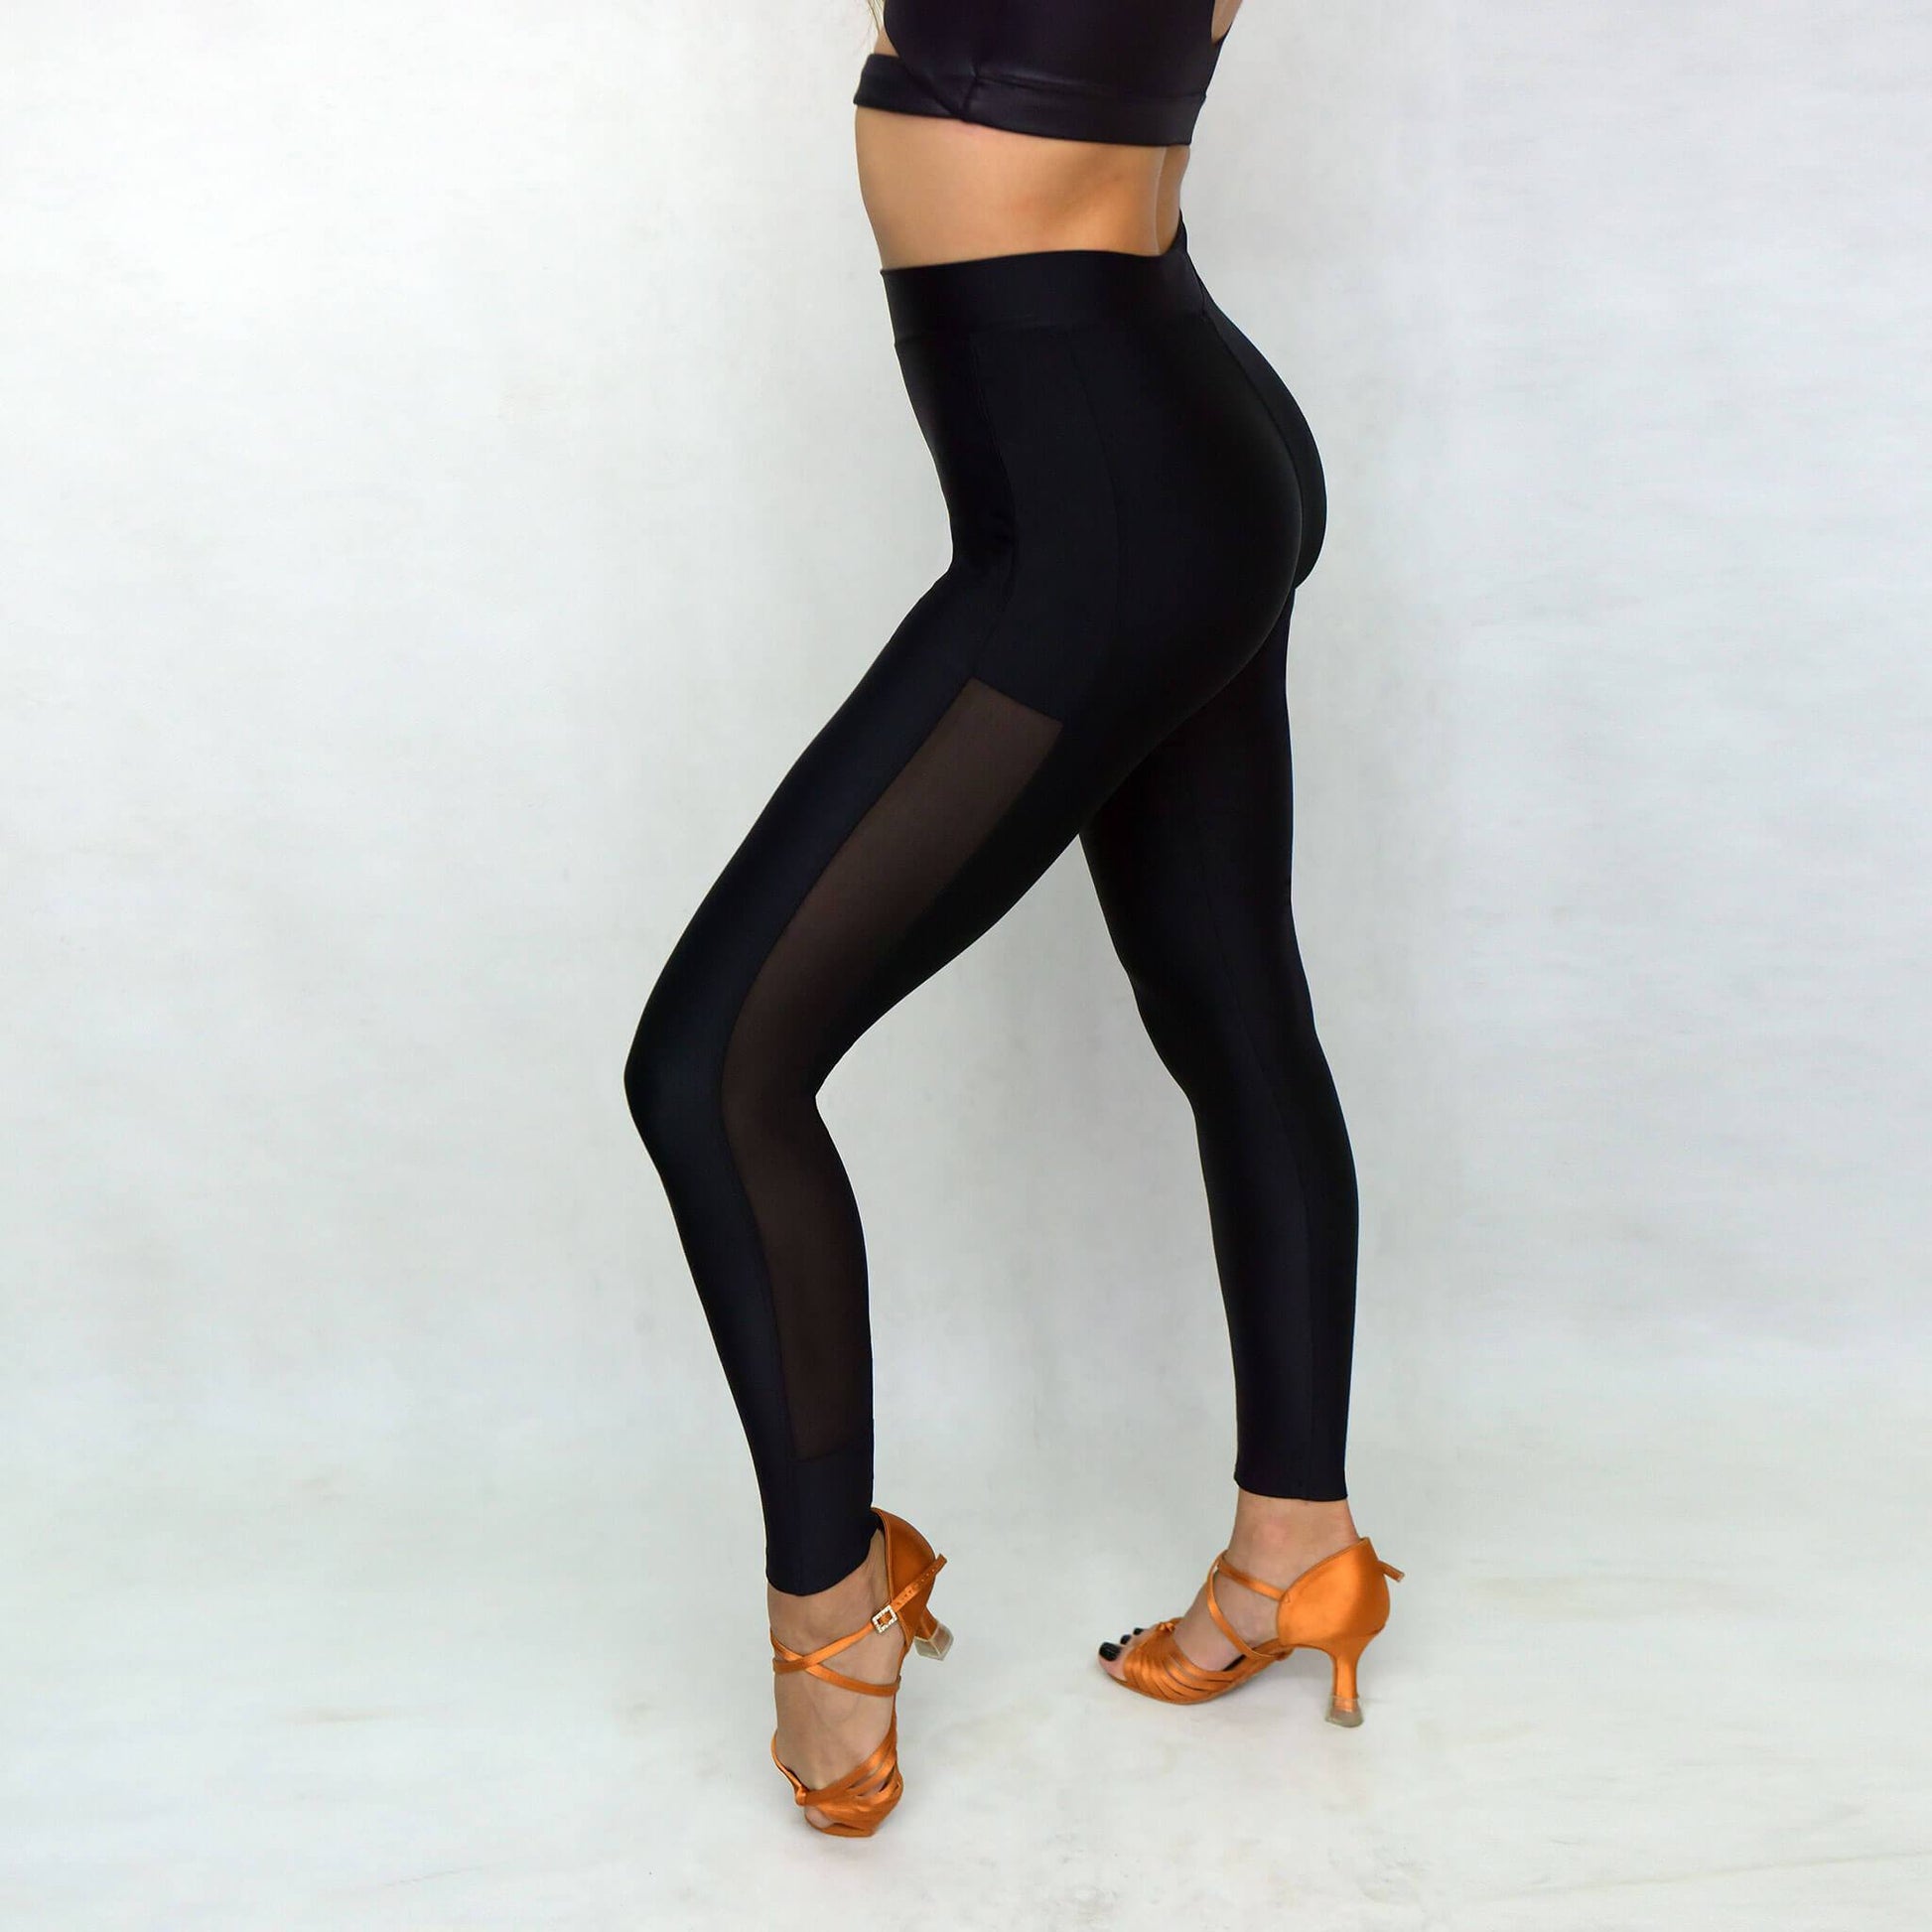 LEGGING WITH SIDE MESH – Sway Dance Your Way